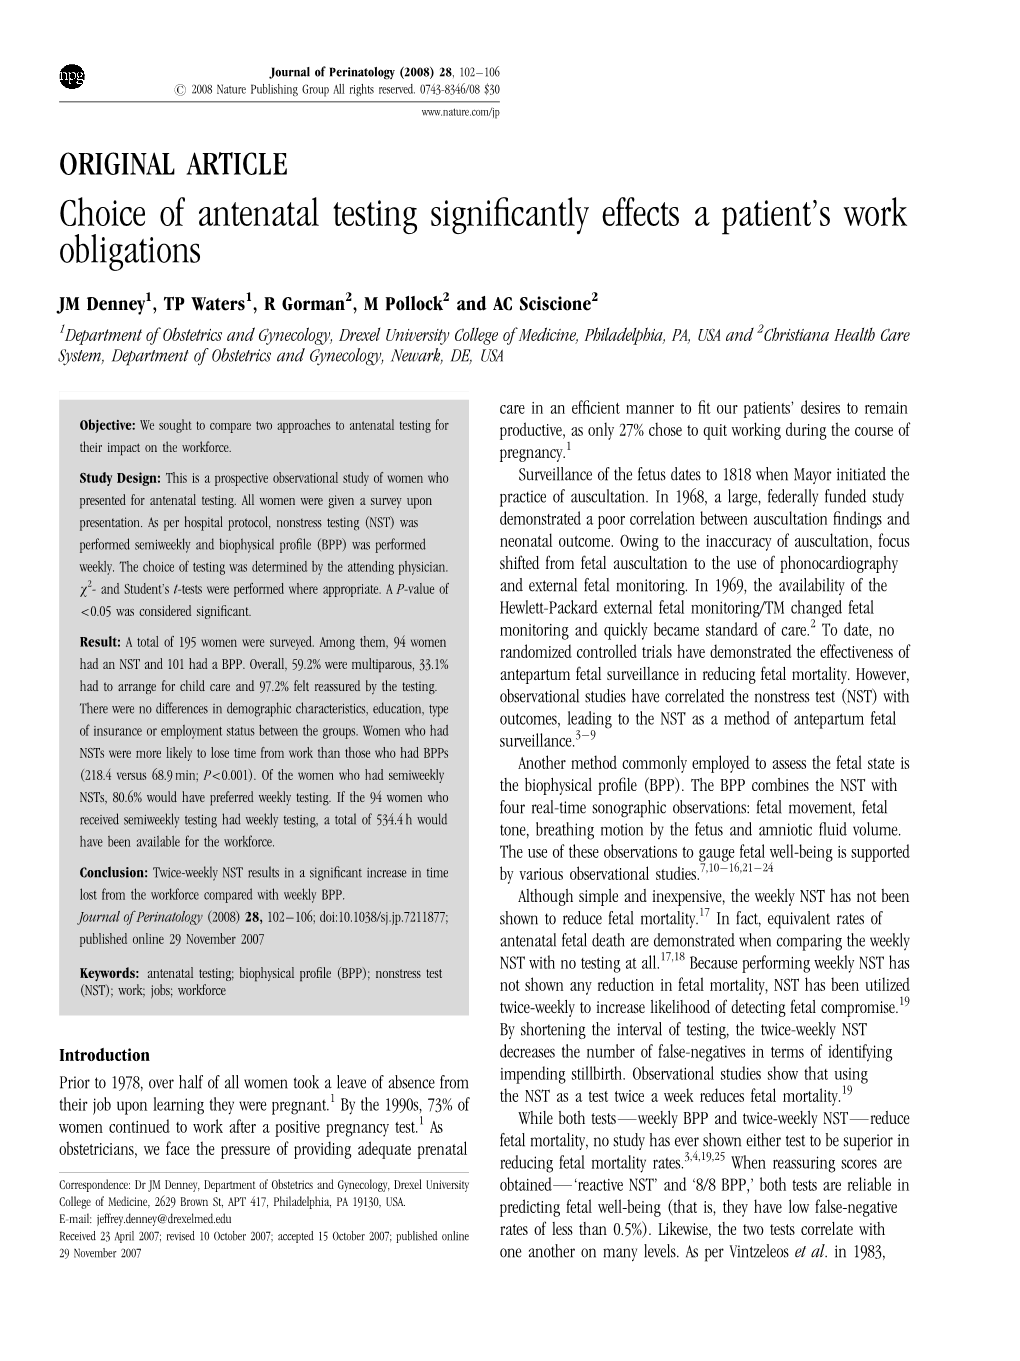 Choice of Antenatal Testing Significantly Effects a Patient's Work